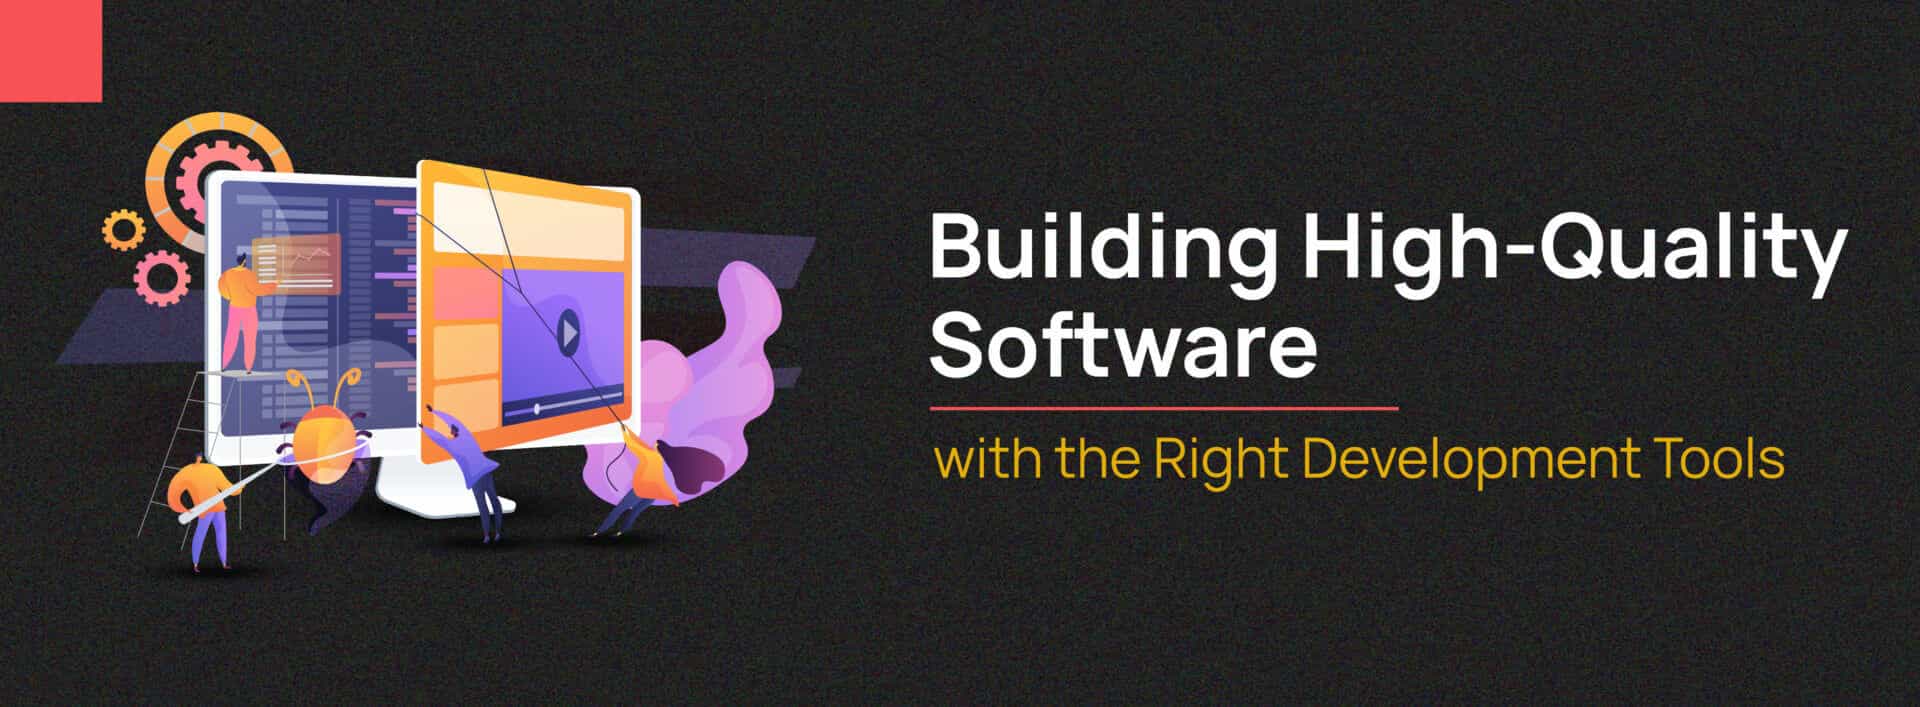 Building High-Quality Software with the Right Development Tools